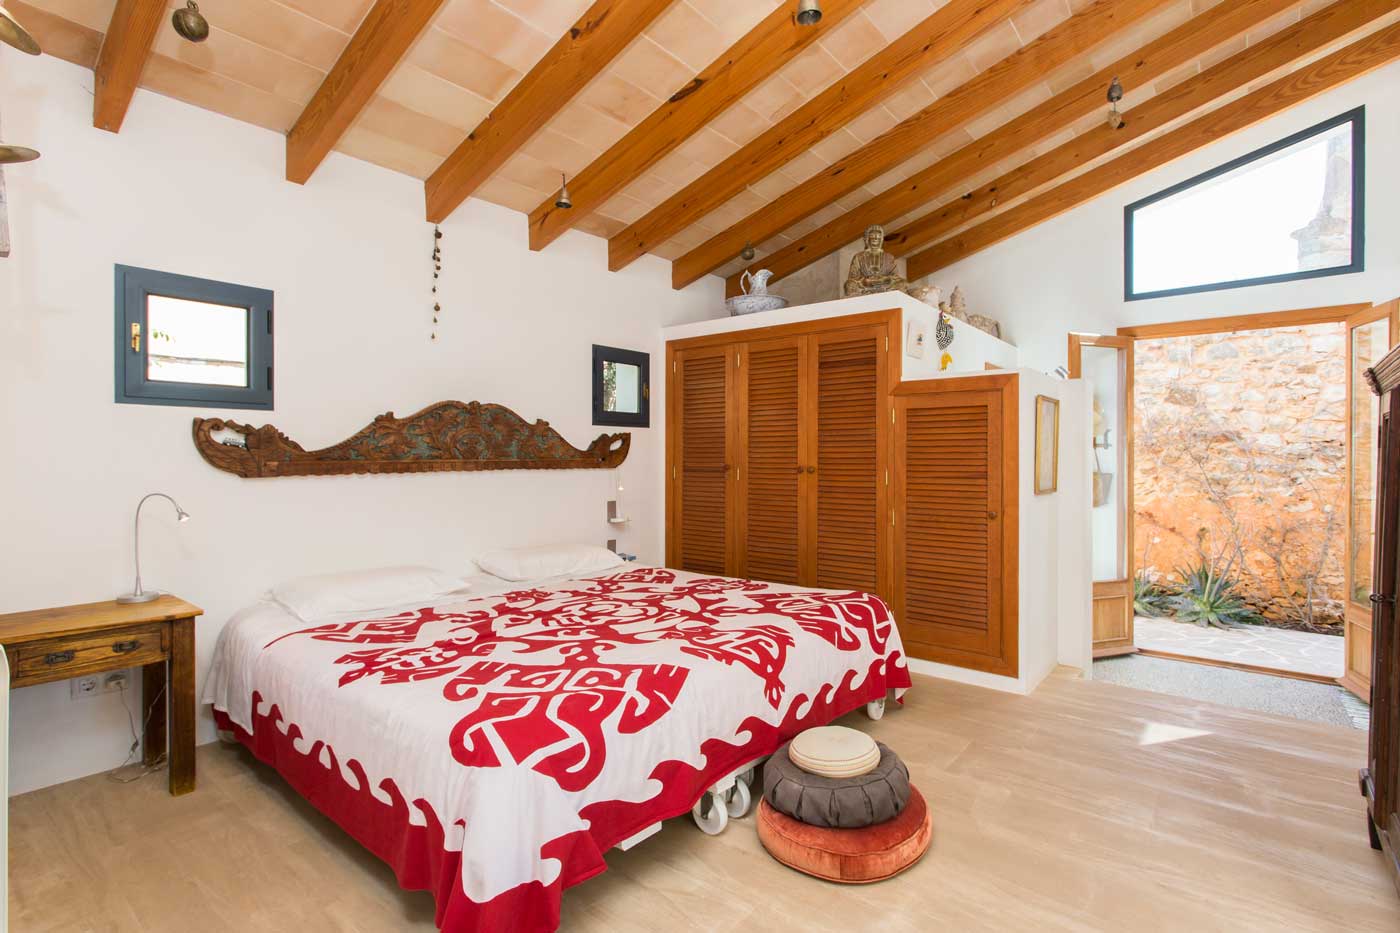 SHIVA: suite with king size bed, shower with glass ceiling and bathroom